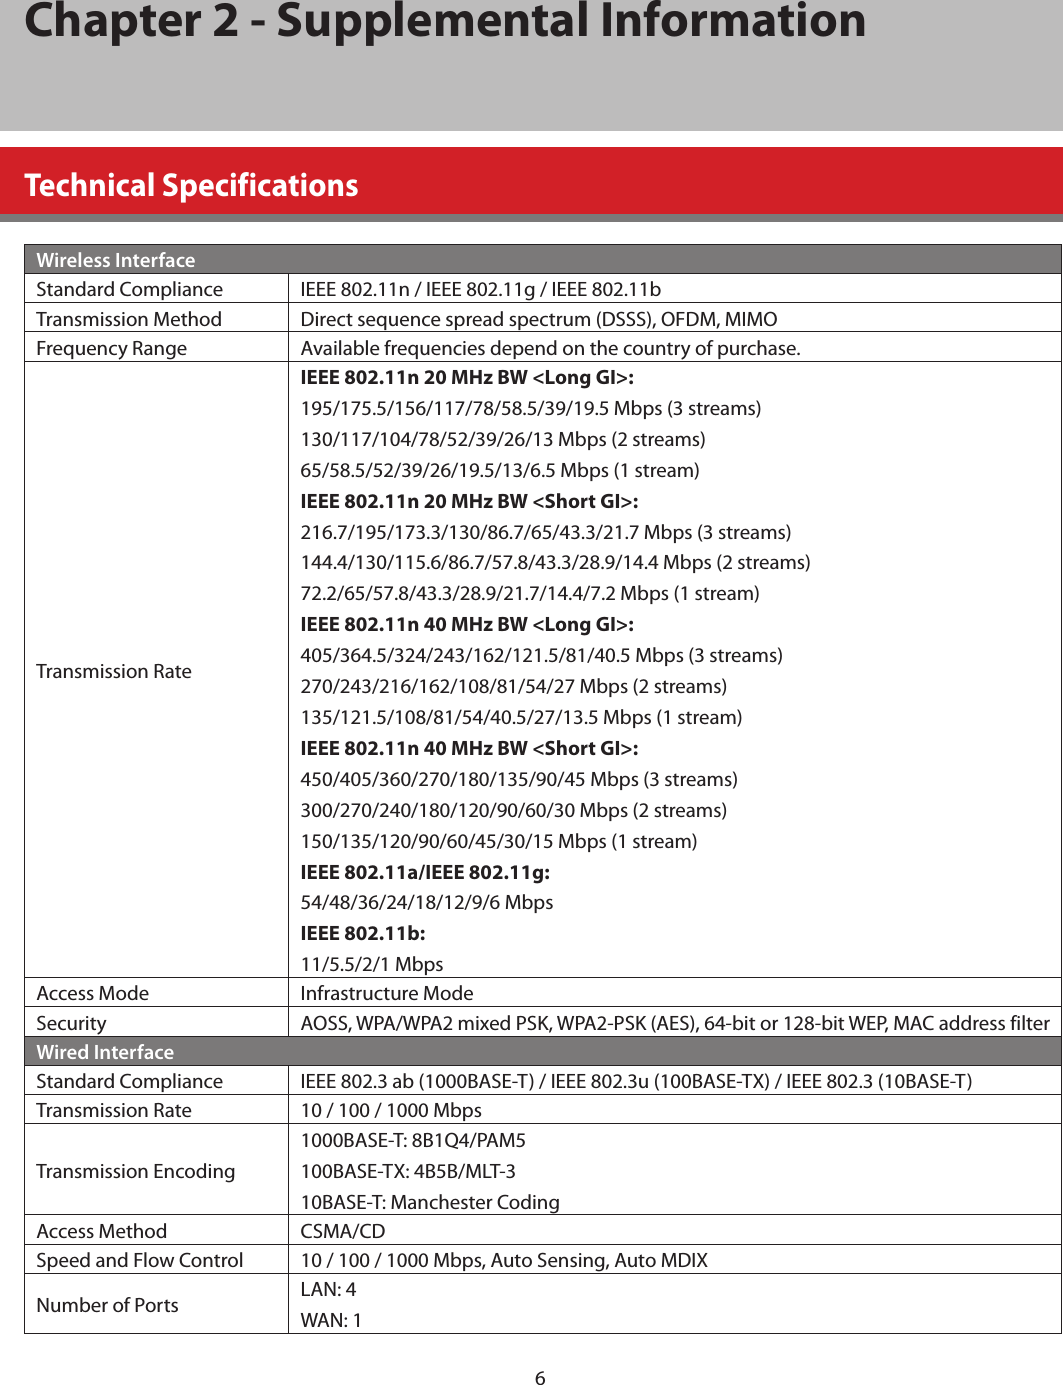 6Chapter 2 - Supplemental InformationTechnical SpecificationsWireless InterfaceStandard Compliance IEEE 802.11n / IEEE 802.11g / IEEE 802.11bTransmission Method Direct sequence spread spectrum (DSSS), OFDM, MIMOFrequency Range Available frequencies depend on the country of purchase.Transmission RateIEEE 802.11n 20 MHz BW &lt;Long GI&gt;:195/175.5/156/117/78/58.5/39/19.5 Mbps (3 streams)130/117/104/78/52/39/26/13 Mbps (2 streams)65/58.5/52/39/26/19.5/13/6.5 Mbps (1 stream)IEEE 802.11n 20 MHz BW &lt;Short GI&gt;:216.7/195/173.3/130/86.7/65/43.3/21.7 Mbps (3 streams)144.4/130/115.6/86.7/57.8/43.3/28.9/14.4 Mbps (2 streams)72.2/65/57.8/43.3/28.9/21.7/14.4/7.2 Mbps (1 stream)IEEE 802.11n 40 MHz BW &lt;Long GI&gt;:405/364.5/324/243/162/121.5/81/40.5 Mbps (3 streams)270/243/216/162/108/81/54/27 Mbps (2 streams)135/121.5/108/81/54/40.5/27/13.5 Mbps (1 stream)IEEE 802.11n 40 MHz BW &lt;Short GI&gt;:450/405/360/270/180/135/90/45 Mbps (3 streams)300/270/240/180/120/90/60/30 Mbps (2 streams)150/135/120/90/60/45/30/15 Mbps (1 stream)IEEE 802.11a/IEEE 802.11g:54/48/36/24/18/12/9/6 MbpsIEEE 802.11b:11/5.5/2/1 MbpsAccess Mode Infrastructure ModeSecurity AOSS, WPA/WPA2 mixed PSK, WPA2-PSK (AES), 64-bit or 128-bit WEP, MAC address filterWired InterfaceStandard Compliance IEEE 802.3 ab (1000BASE-T) / IEEE 802.3u (100BASE-TX) / IEEE 802.3 (10BASE-T)Transmission Rate 10 / 100 / 1000 MbpsTransmission Encoding1000BASE-T: 8B1Q4/PAM5100BASE-TX: 4B5B/MLT-310BASE-T: Manchester CodingAccess Method CSMA/CDSpeed and Flow Control 10 / 100 / 1000 Mbps, Auto Sensing, Auto MDIXNumber of Ports LAN: 4WAN: 1